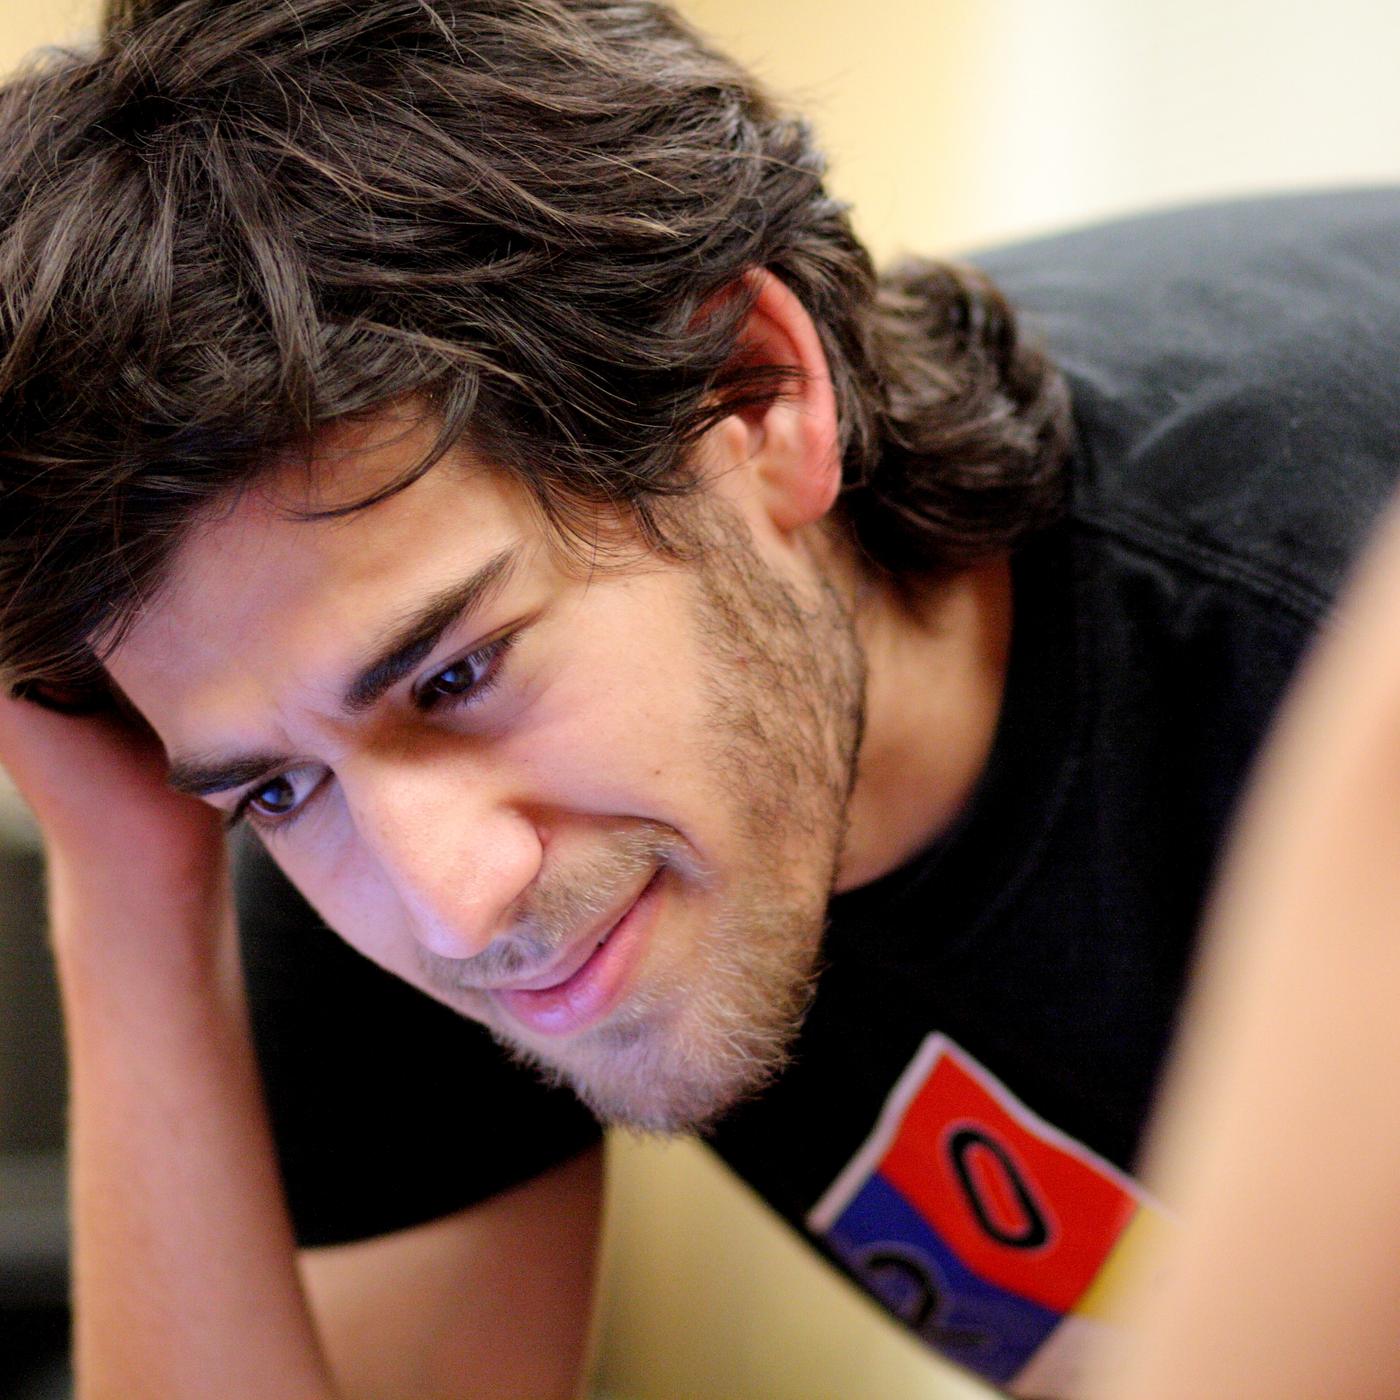 Aaron Swartz: The Wunderkind of the Free Culture Movement